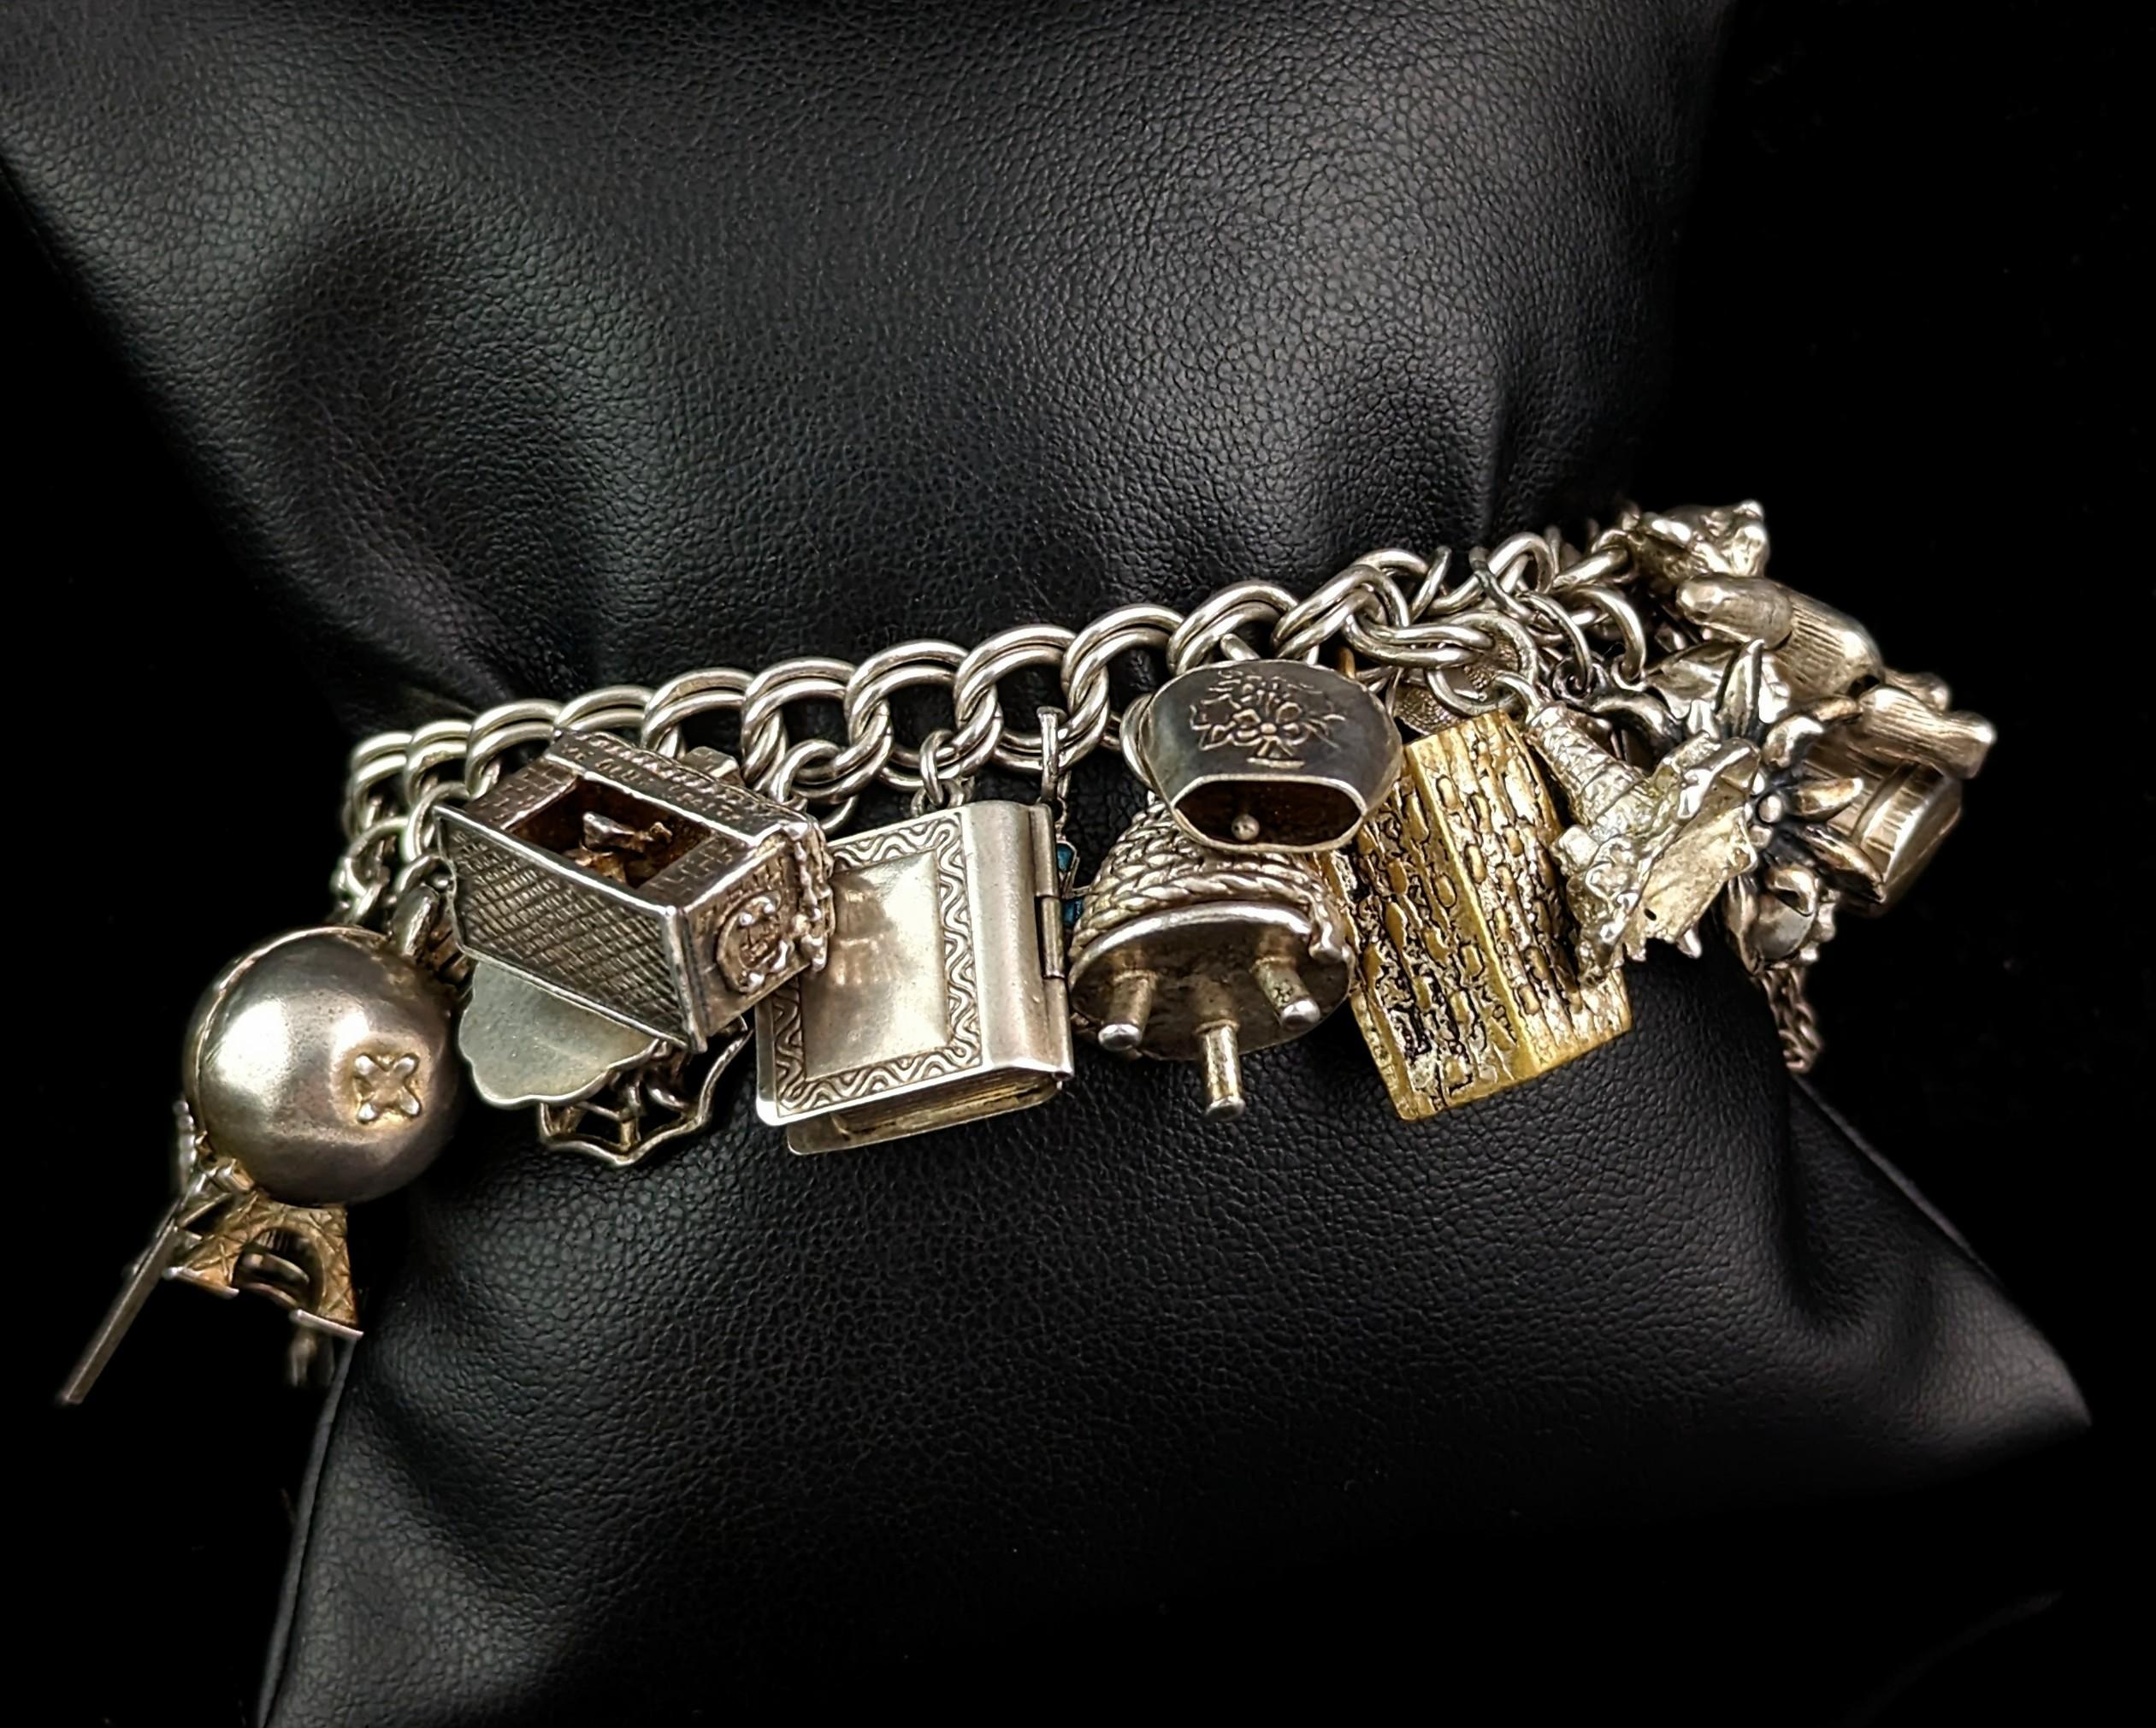 An outstanding vintage sterling silver charm bracelet loaded with silver charms.

This bracelet has been built upon over many years and boasts a really impressive and unique array of different charms.

It is built upon a chunky silver double curb